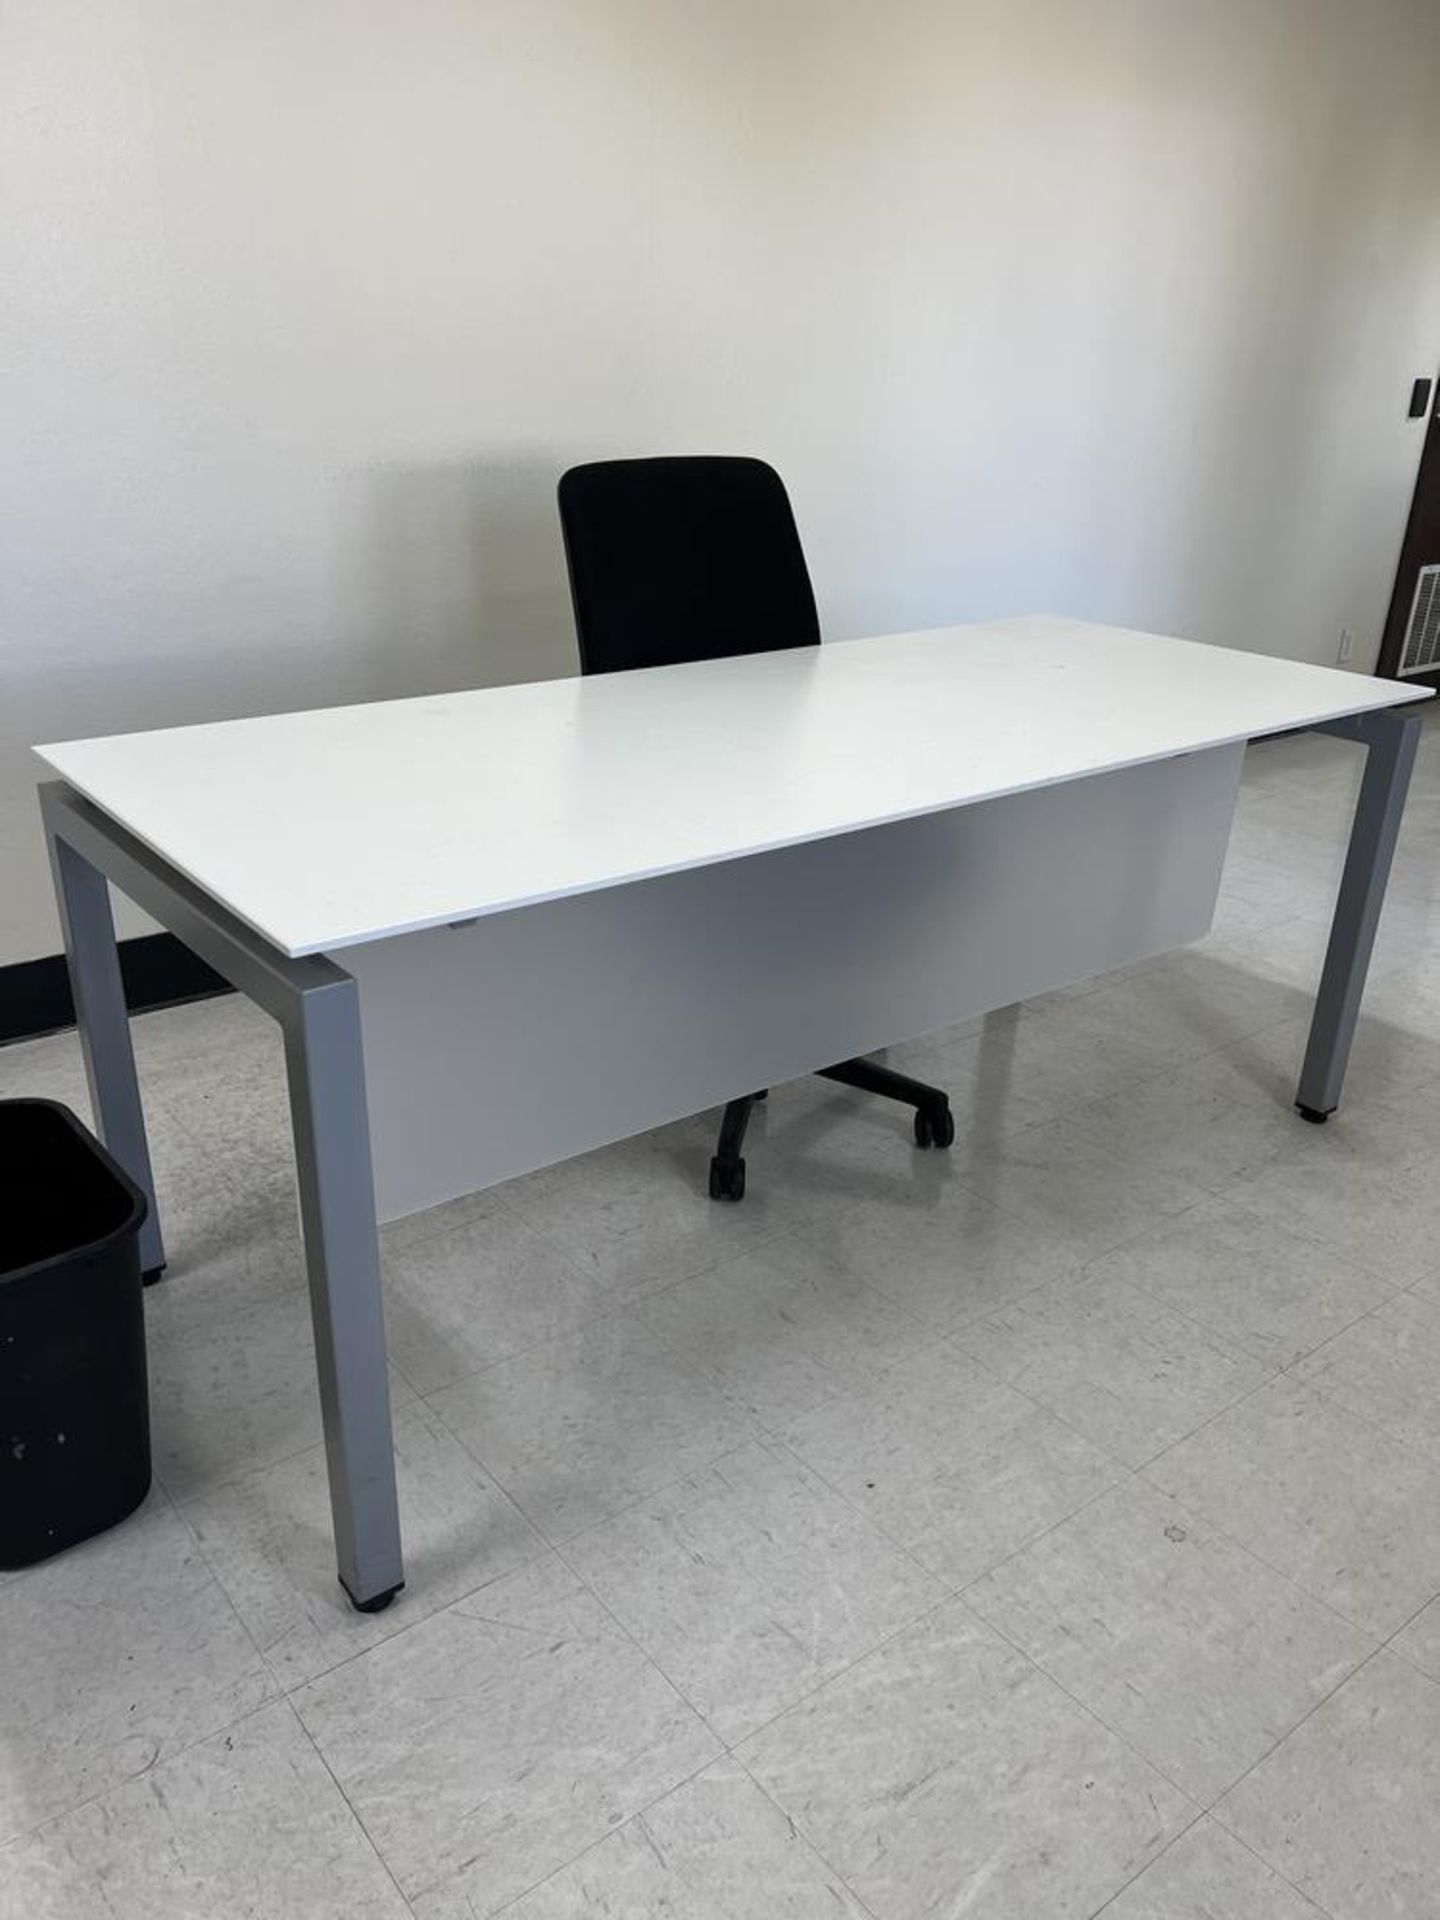 (6) Office Desks & (4) Office Chairs (No Other Contents)